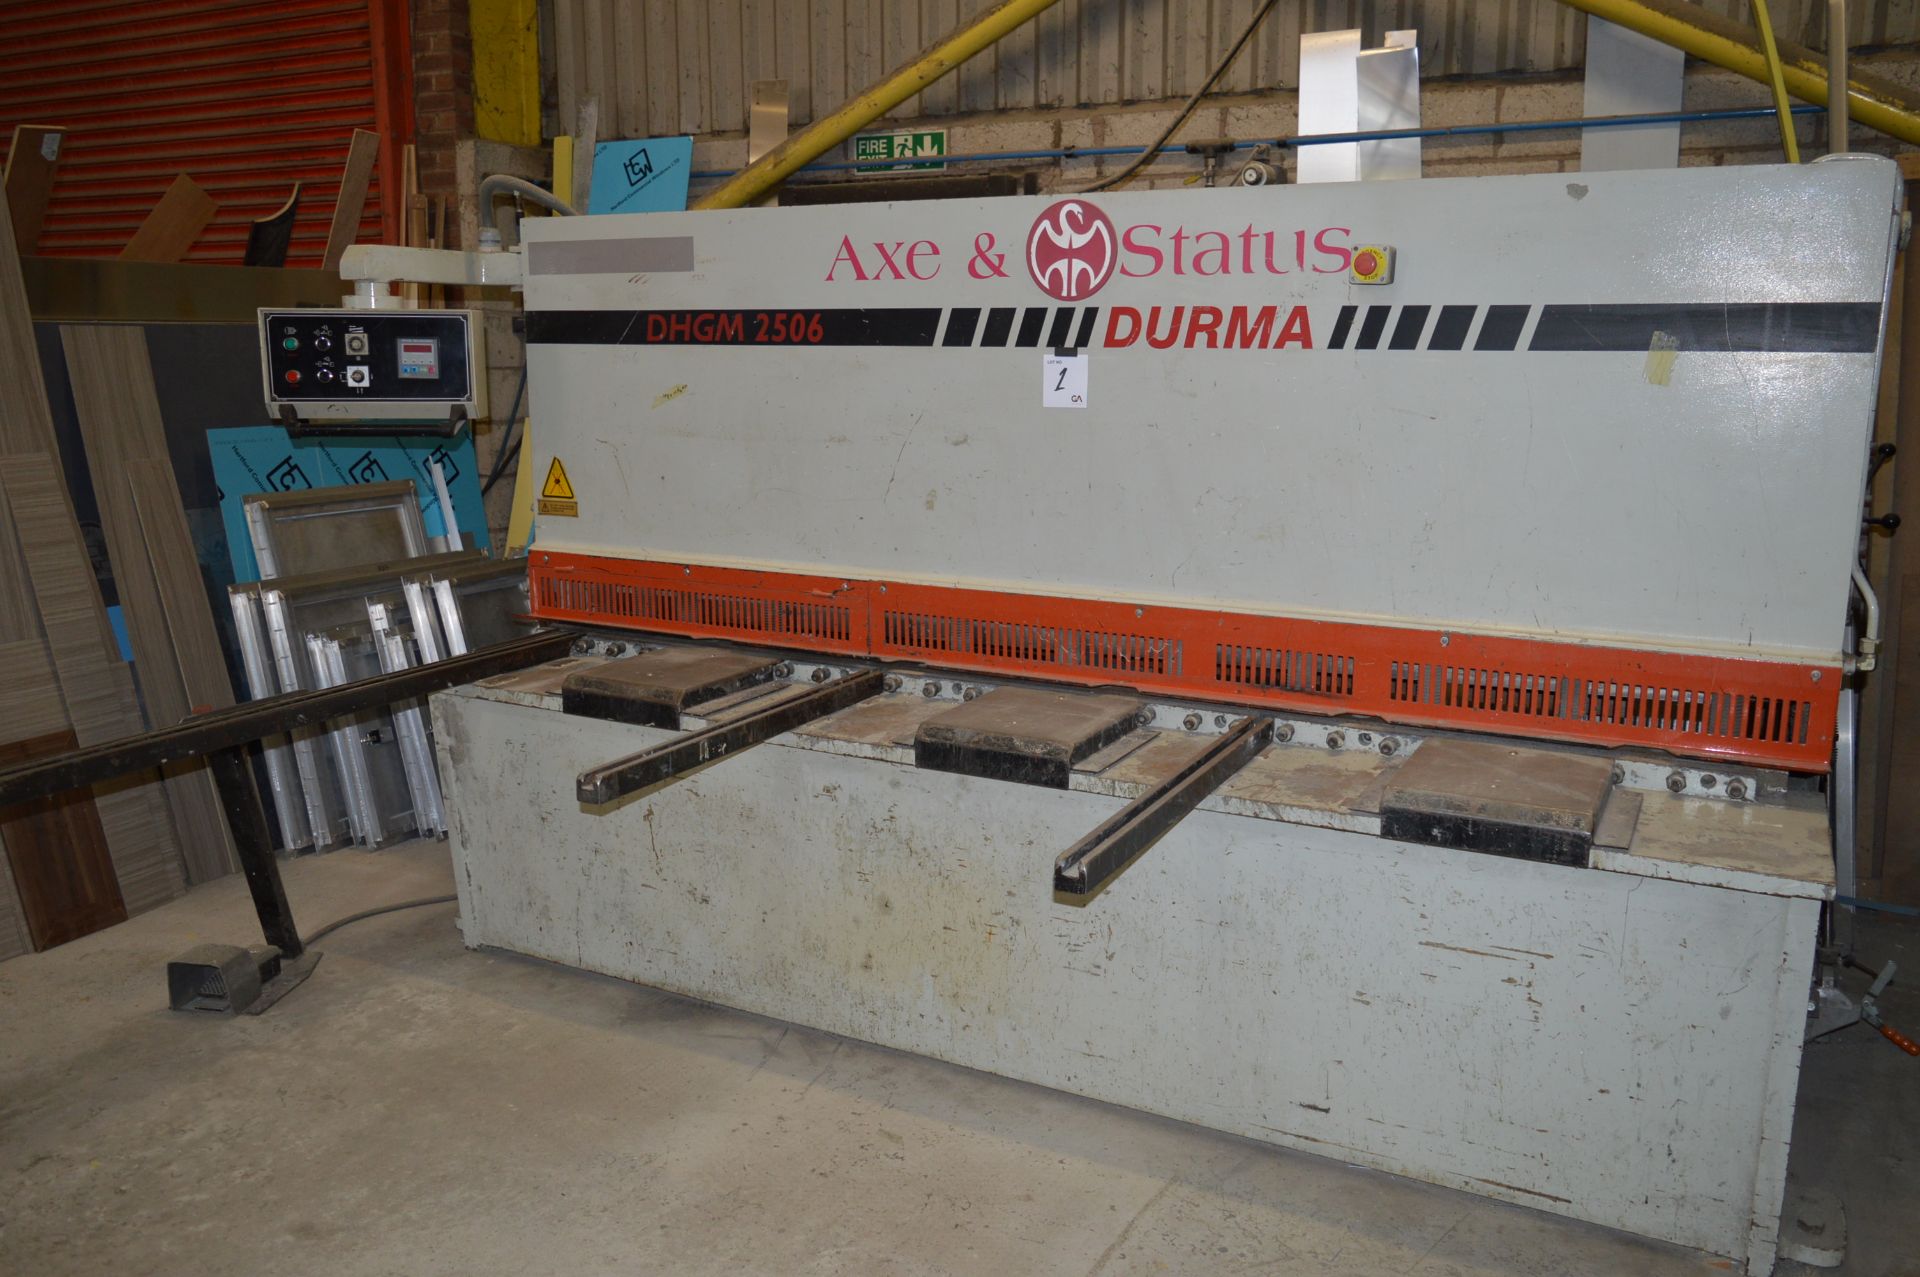 Durma hydraulic guillotine Type: DHGM 2506 c/w backstop, pneumatic sheet support and controls - Image 2 of 5